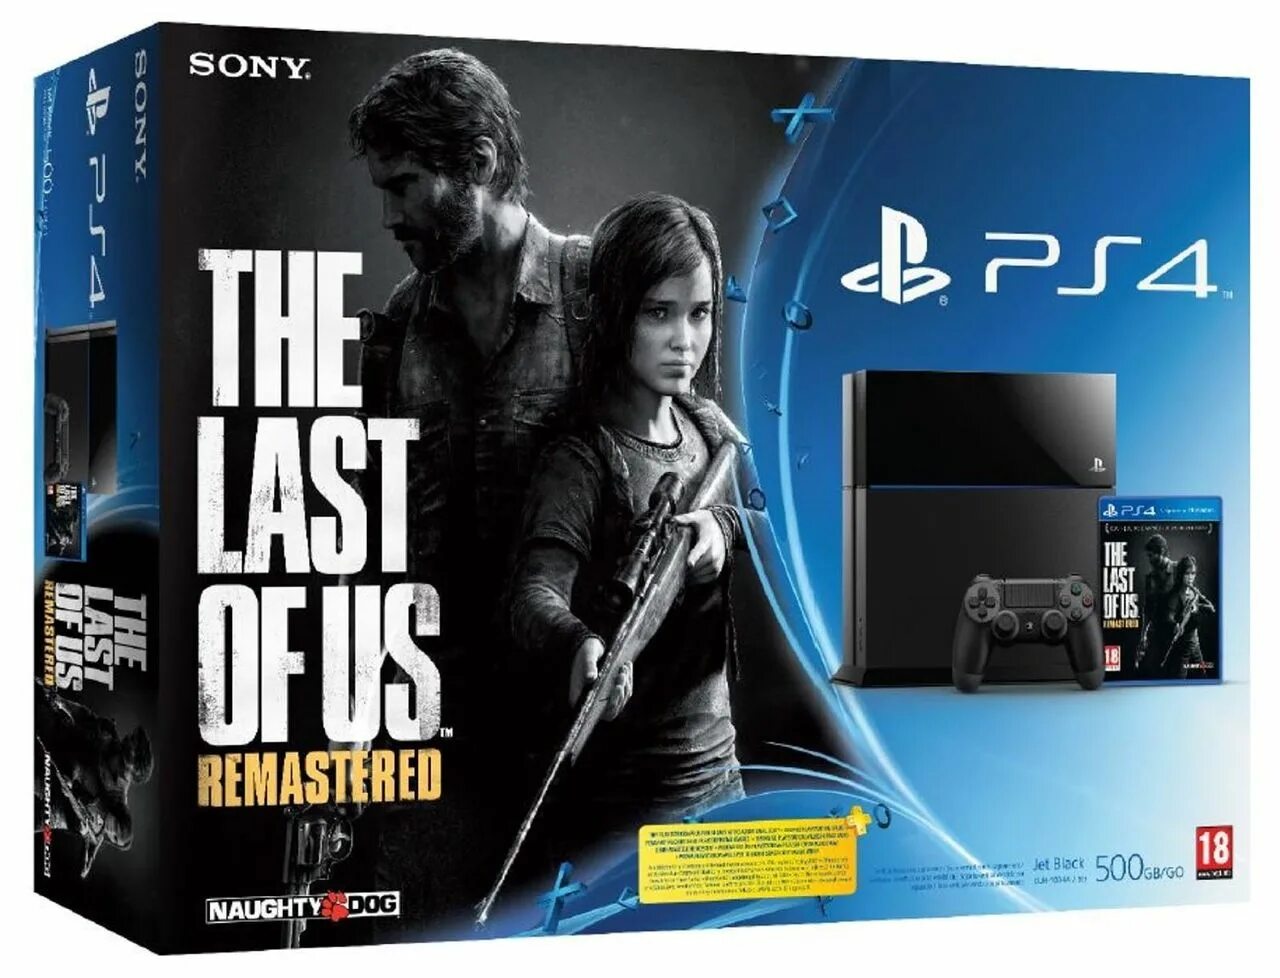 Пс4 the last of us Remastered. The last of us ps4. The last of us Remastered ps4 русская версия. The last of us ps4 диск.